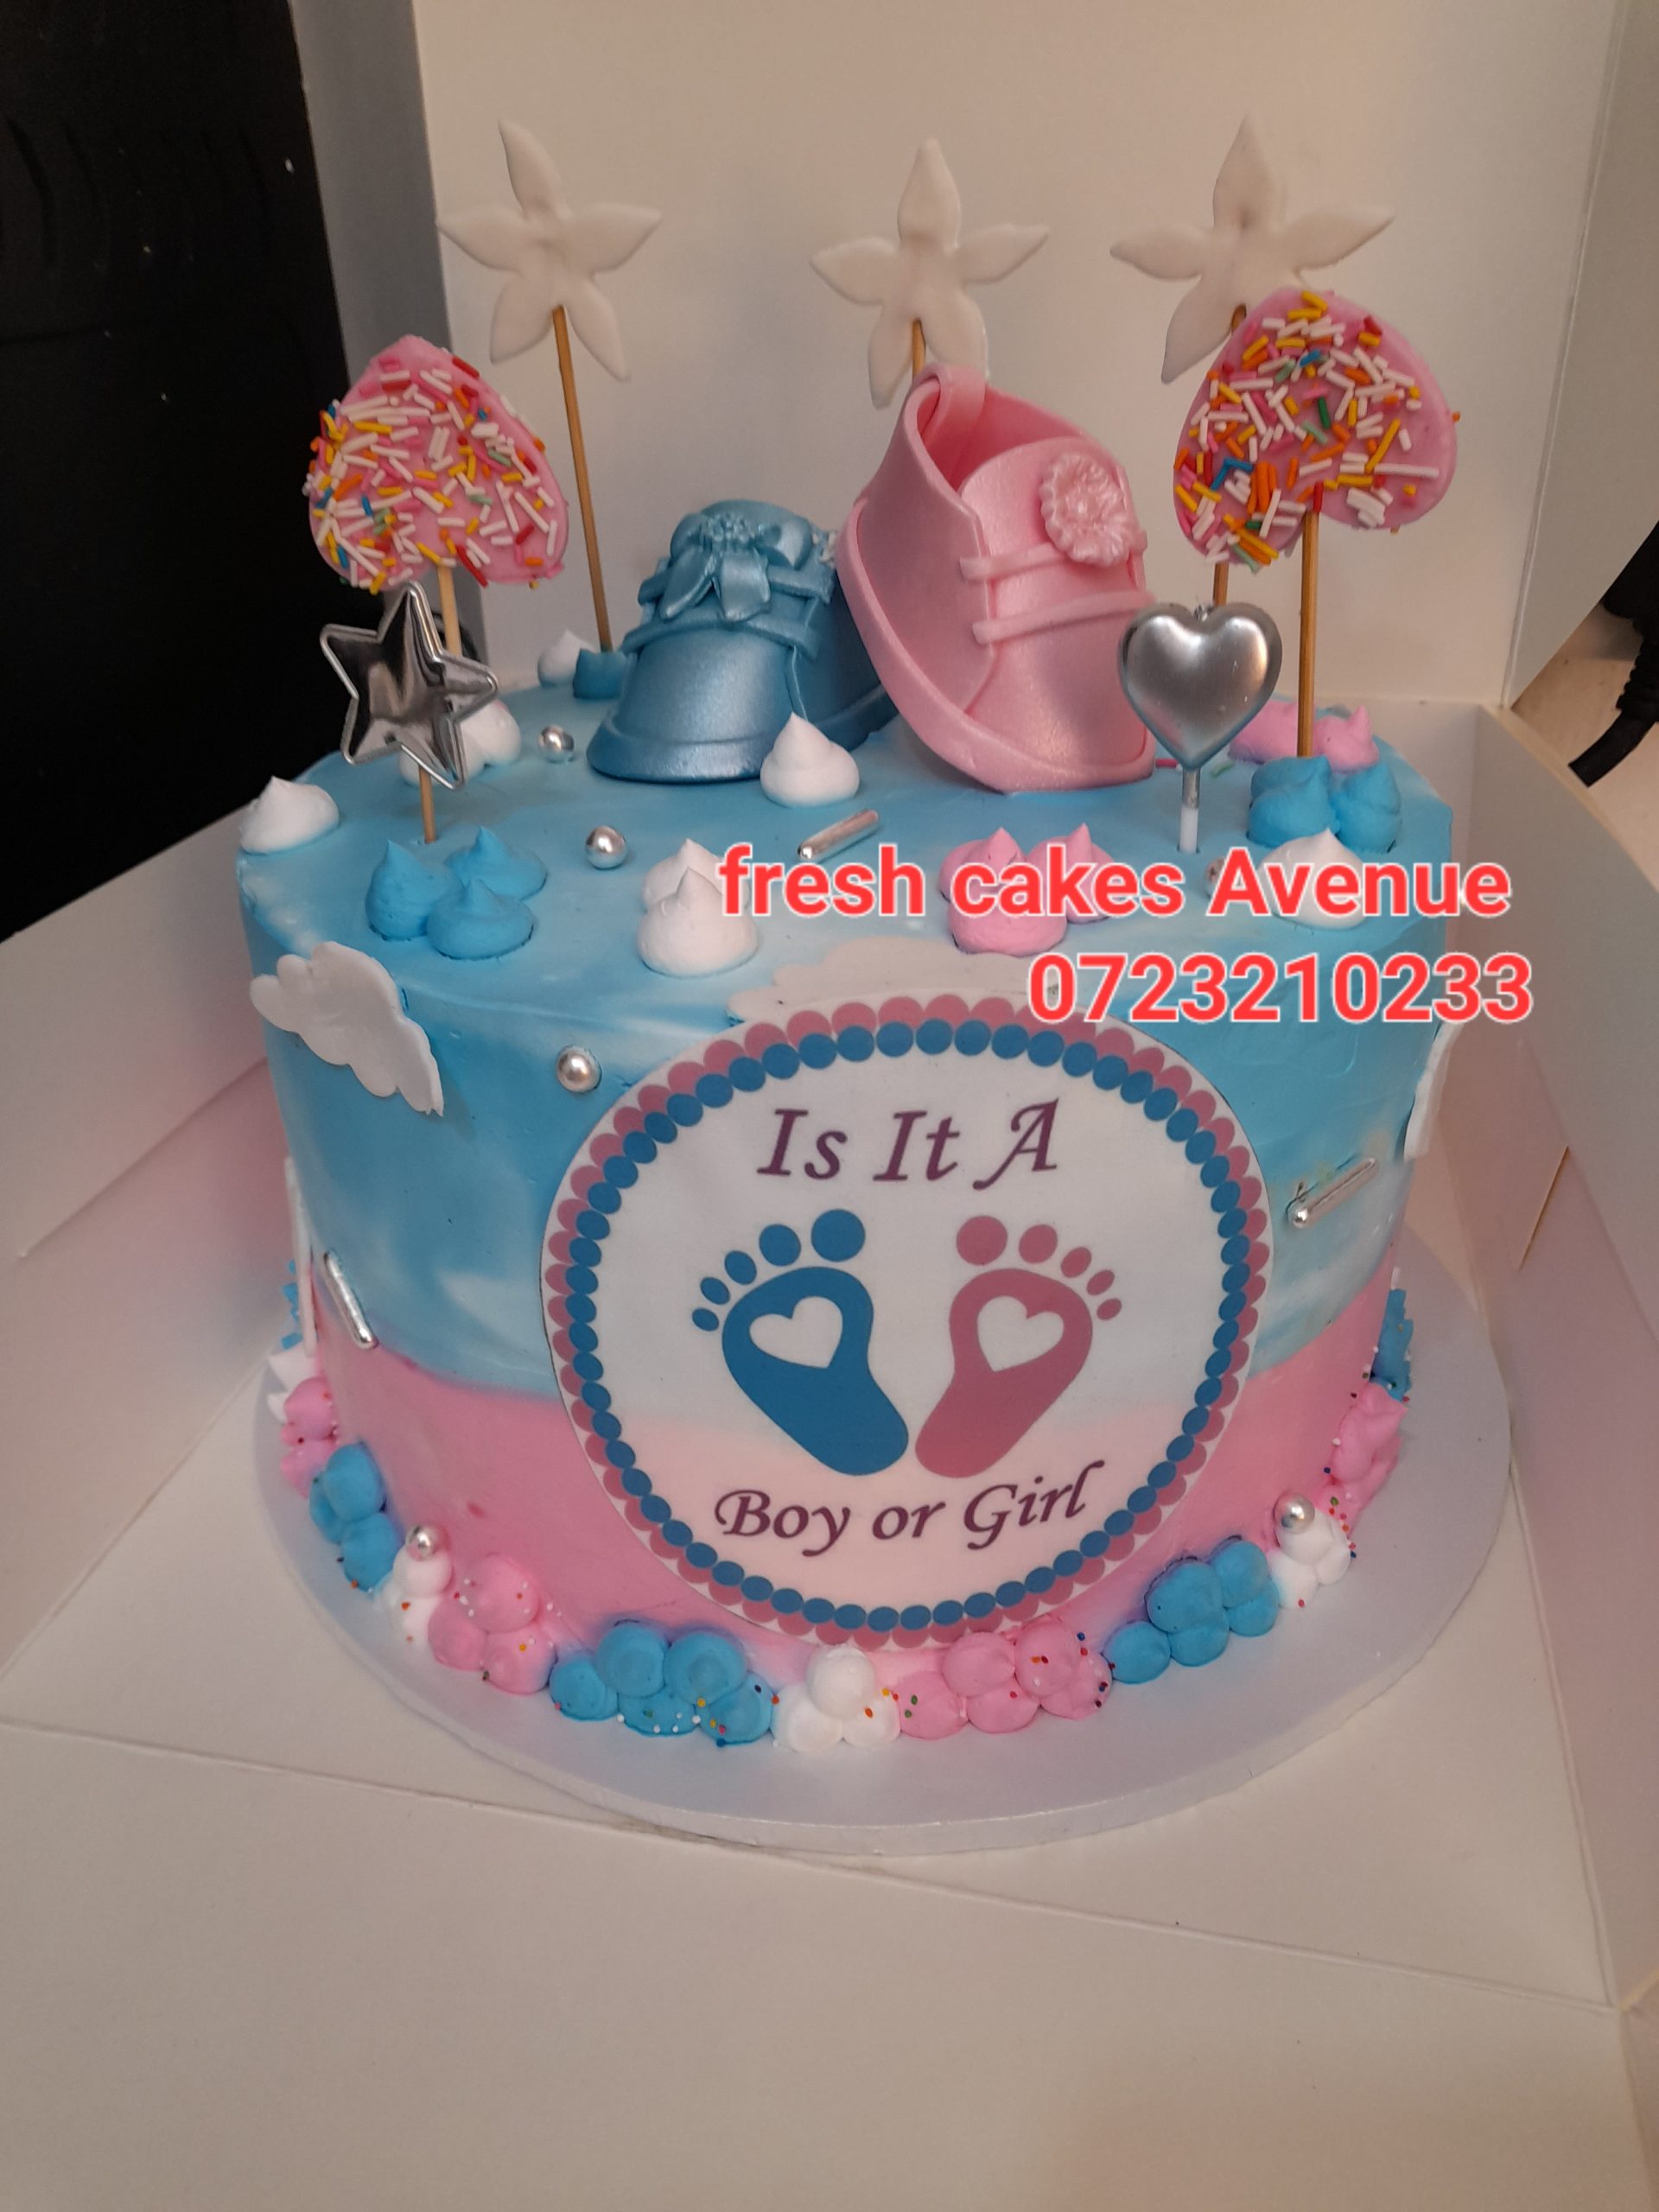 10 Baby Shower Cakes Totally Worth The Effort | Queen